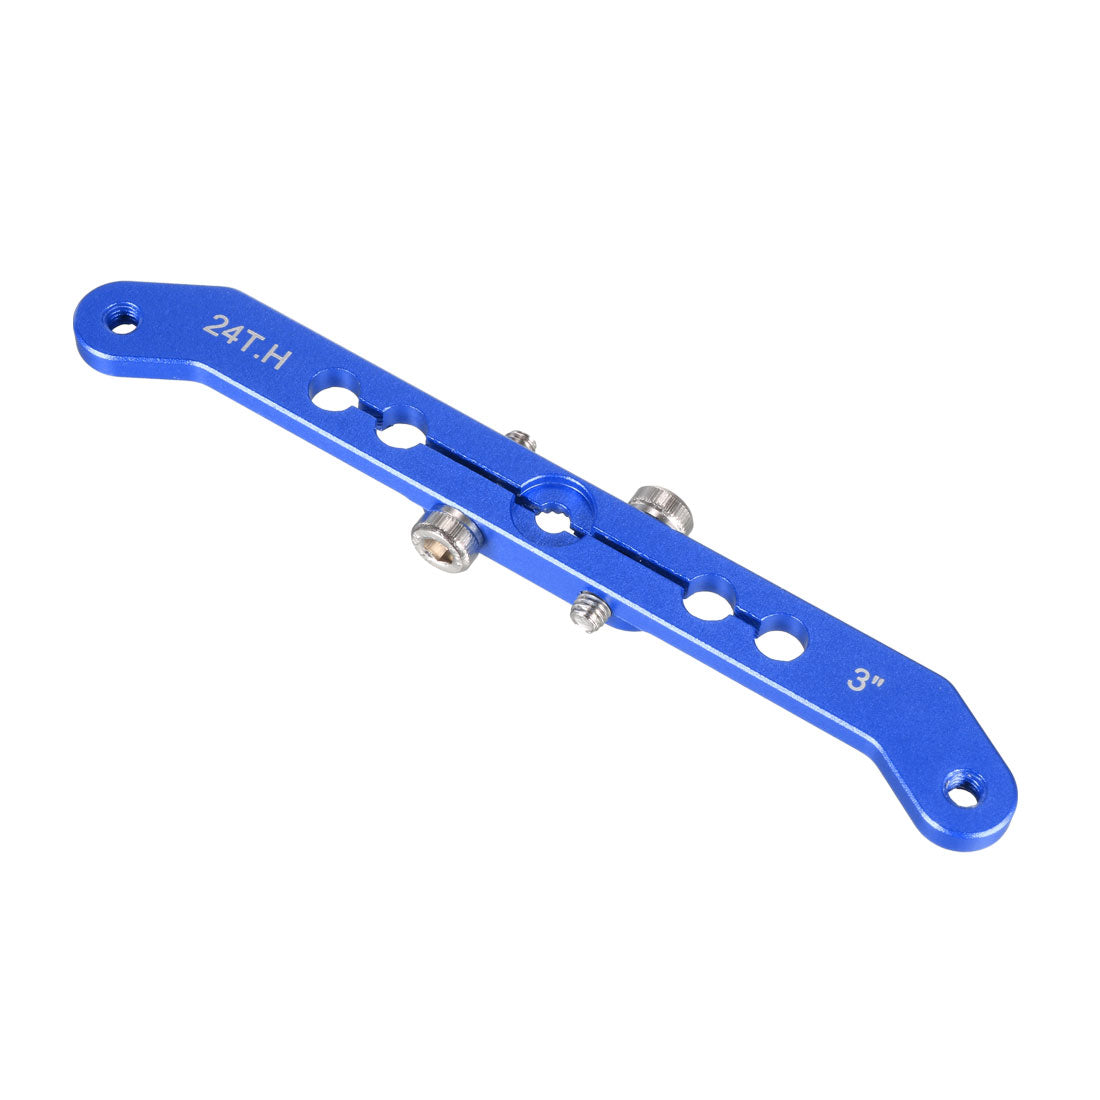 uxcell Uxcell Aluminum Servo Arms Double Arm 24T M3 Thread Blue, for 3 Inch